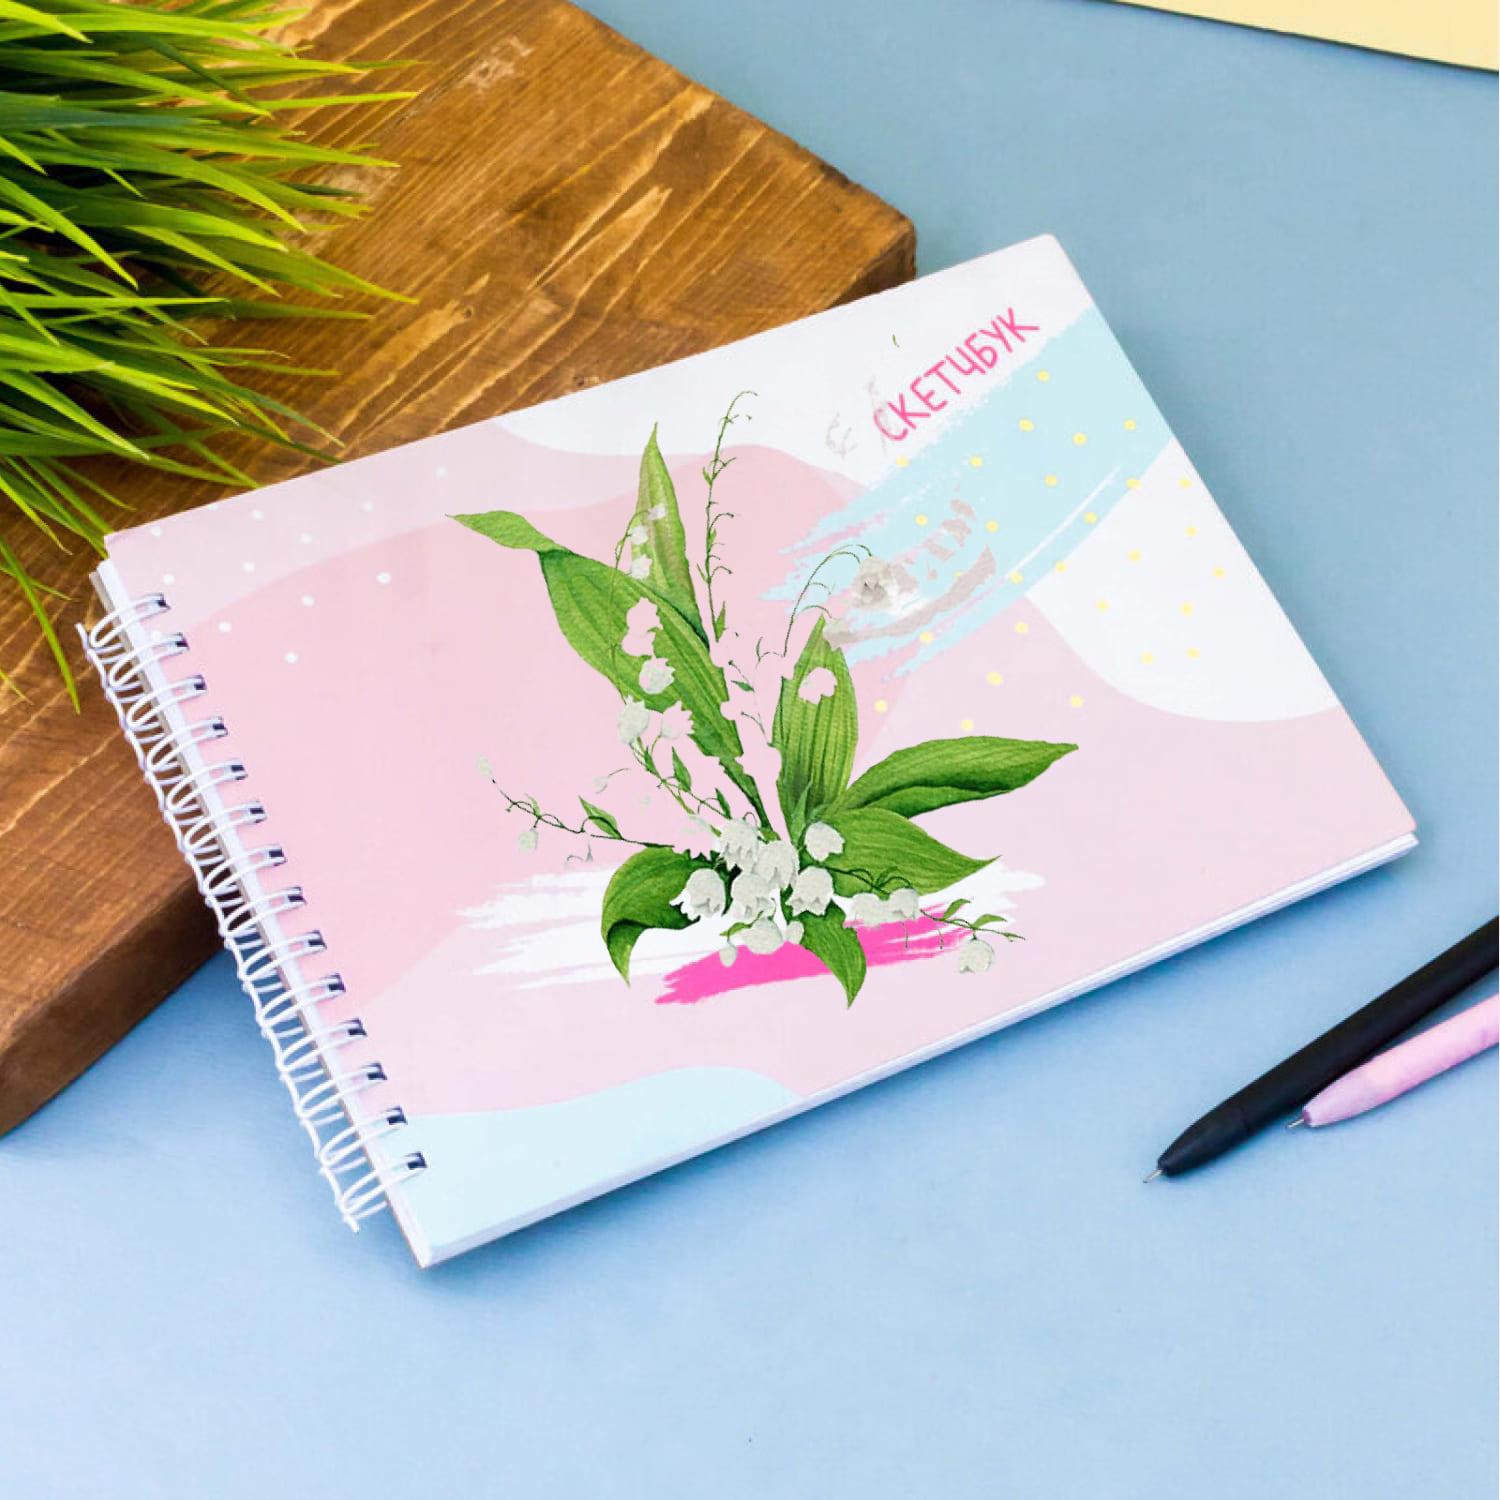 Beautiful graphic lily elements for your creative notes.